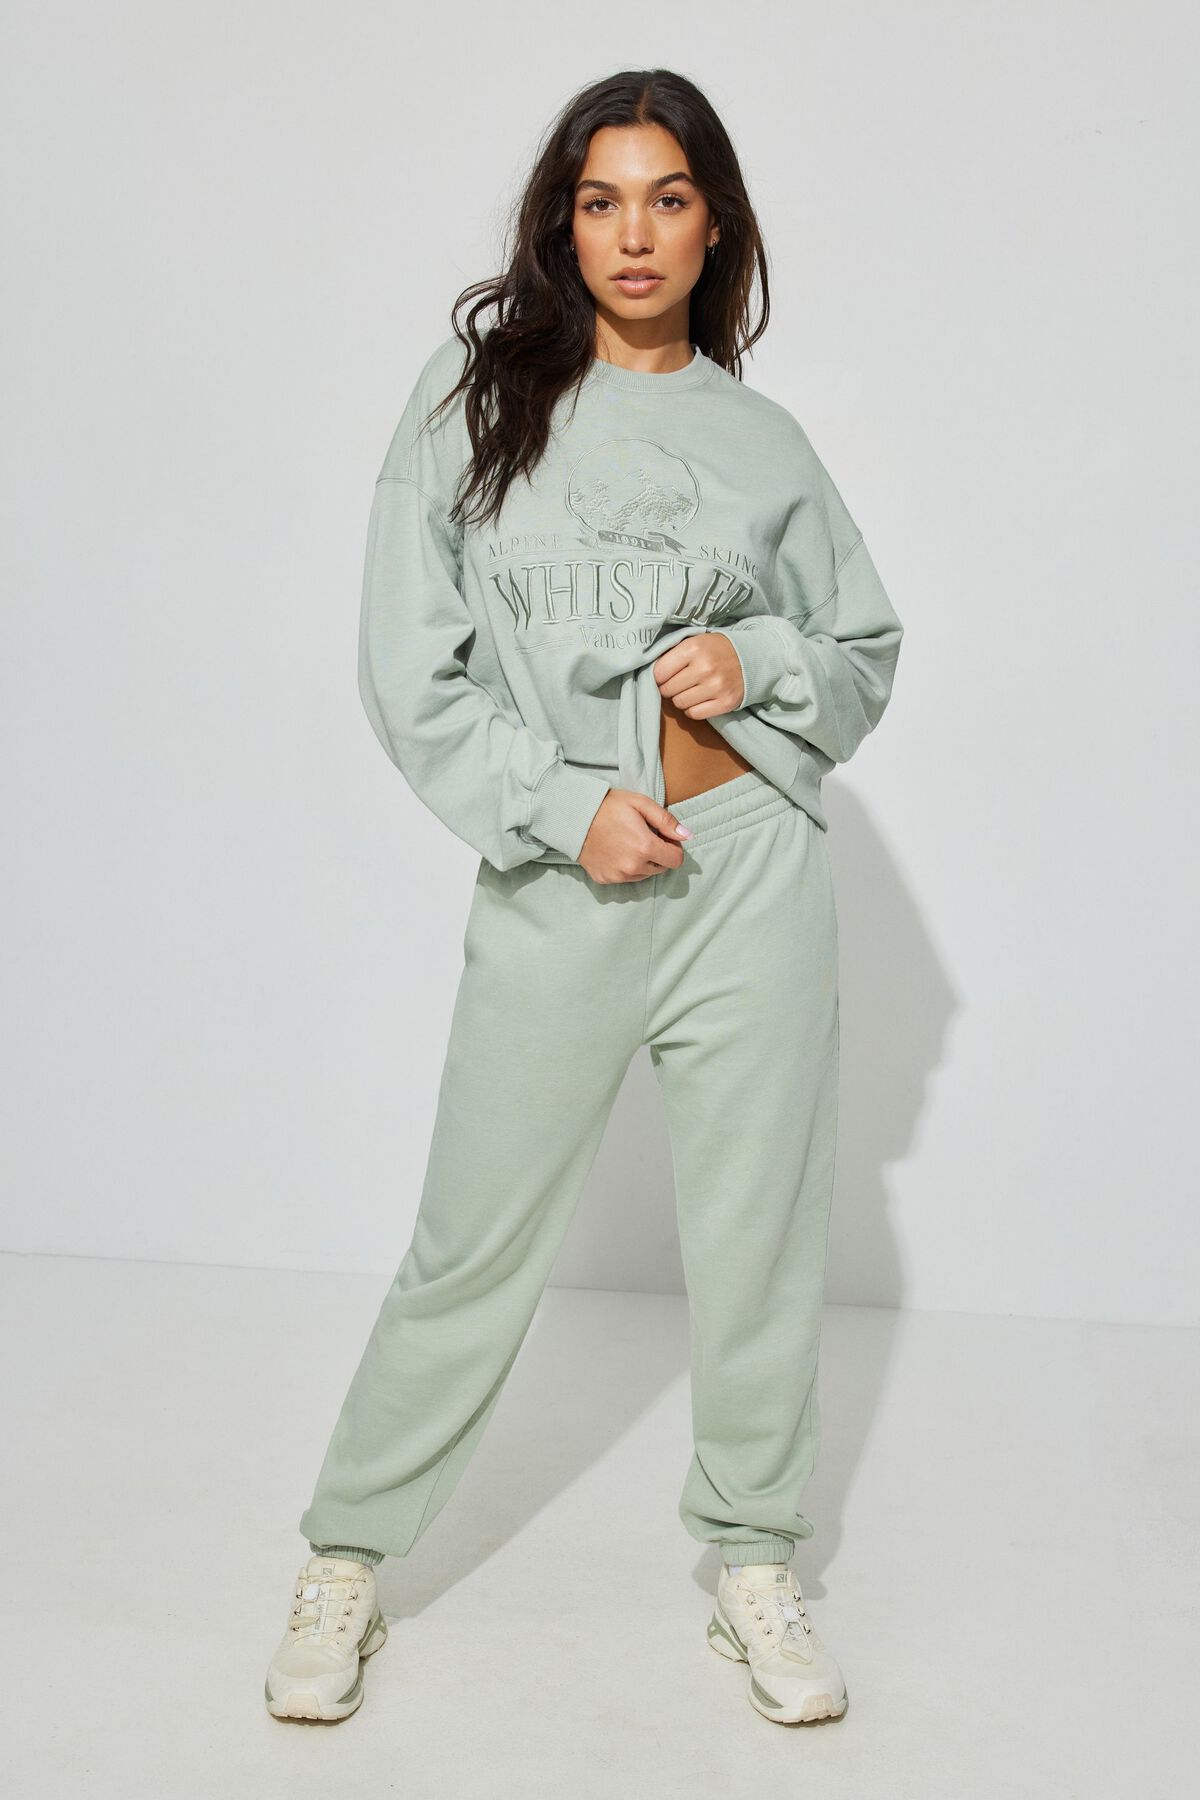 Women's Essential Logo Joggers in Minted Green Marl